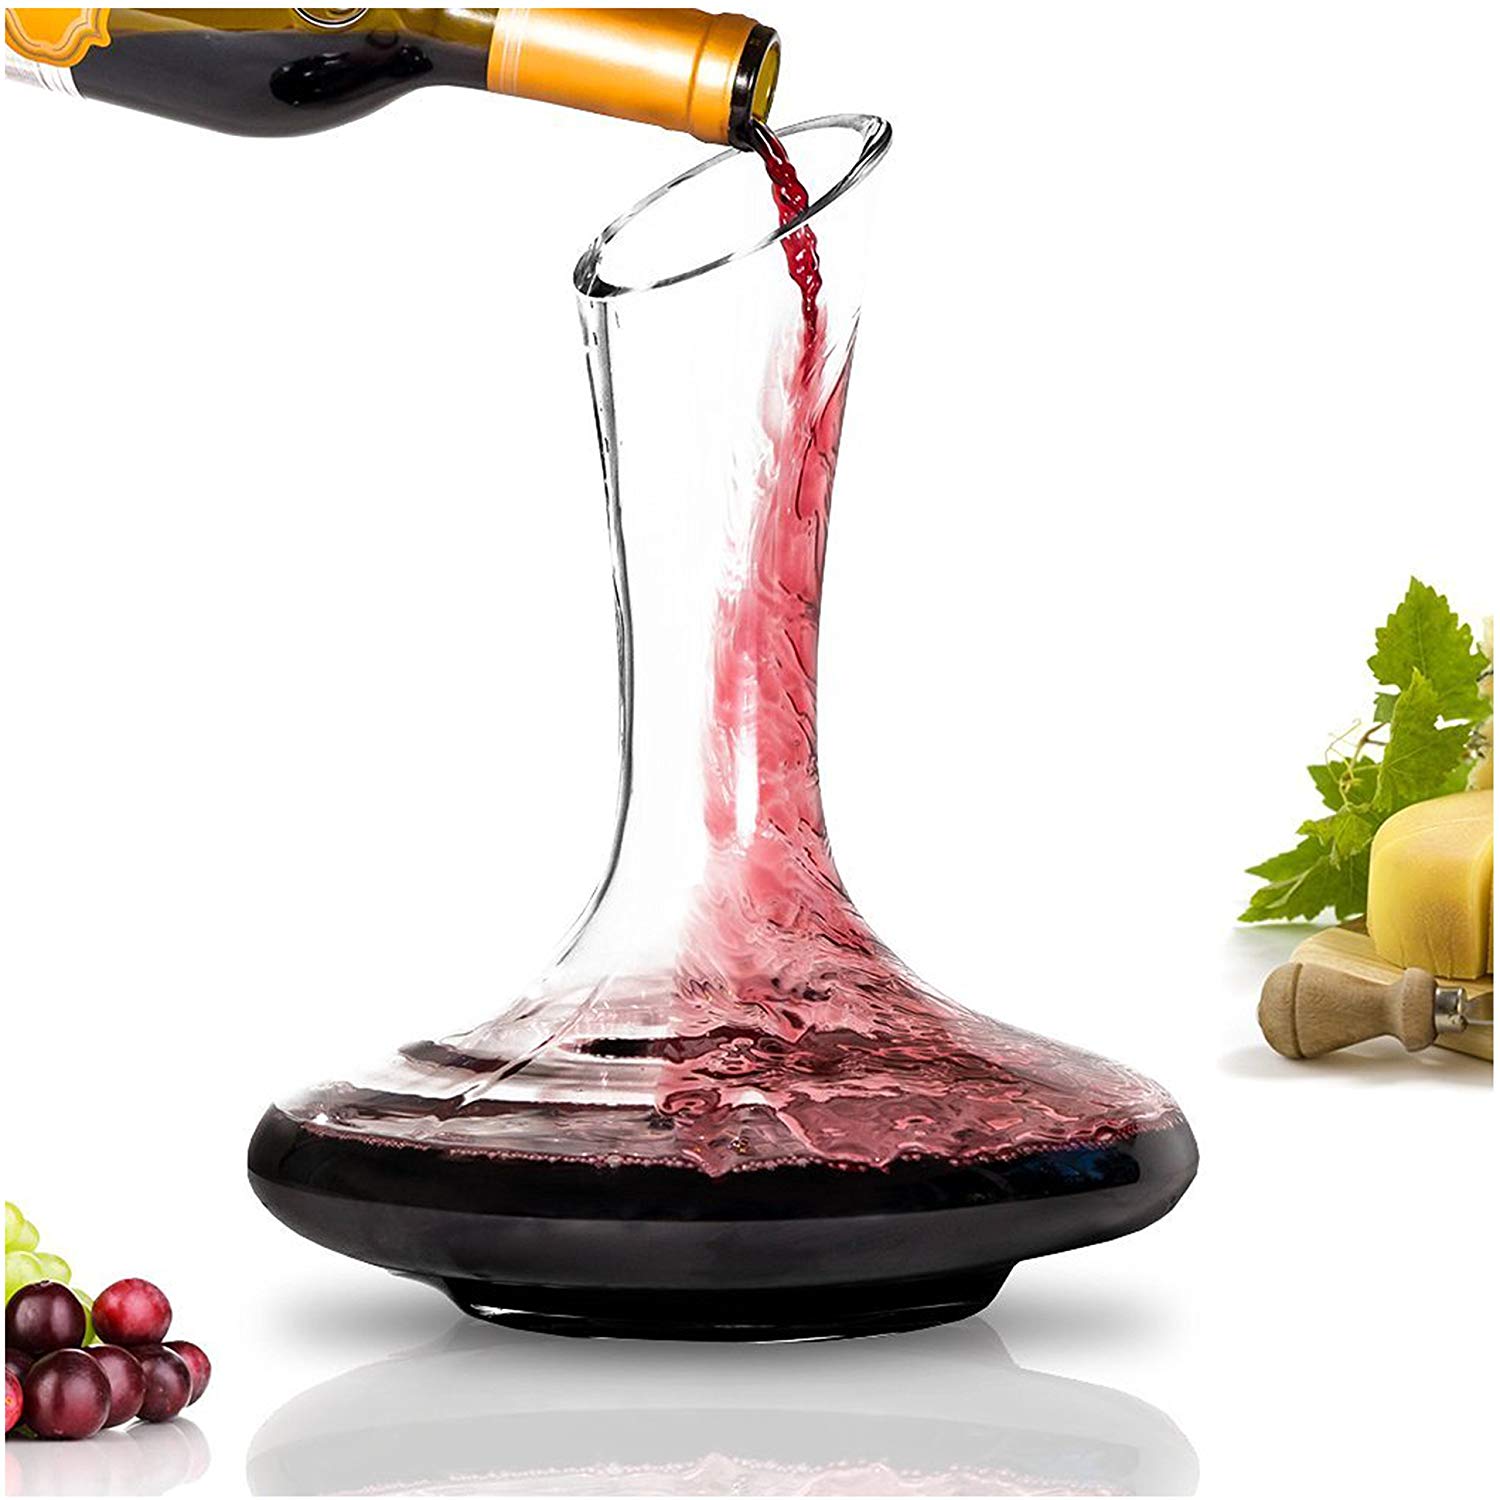 TALLKING Red Wine Decanter, Whisky Decanter Crystal